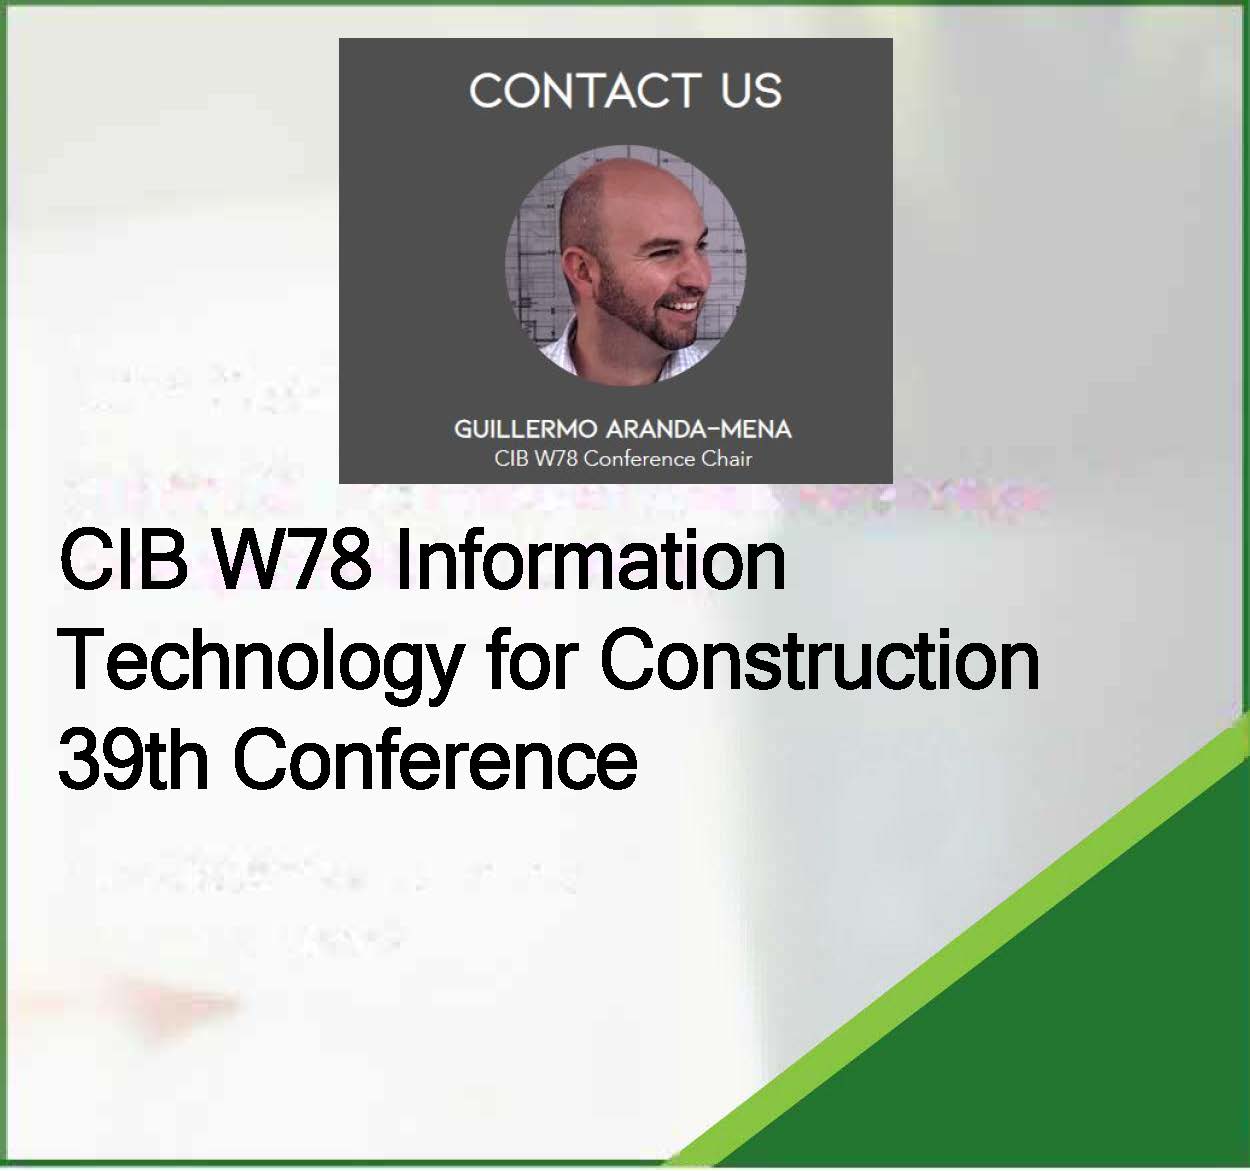 CIB W78 Information Technology for Construction 39th Conference